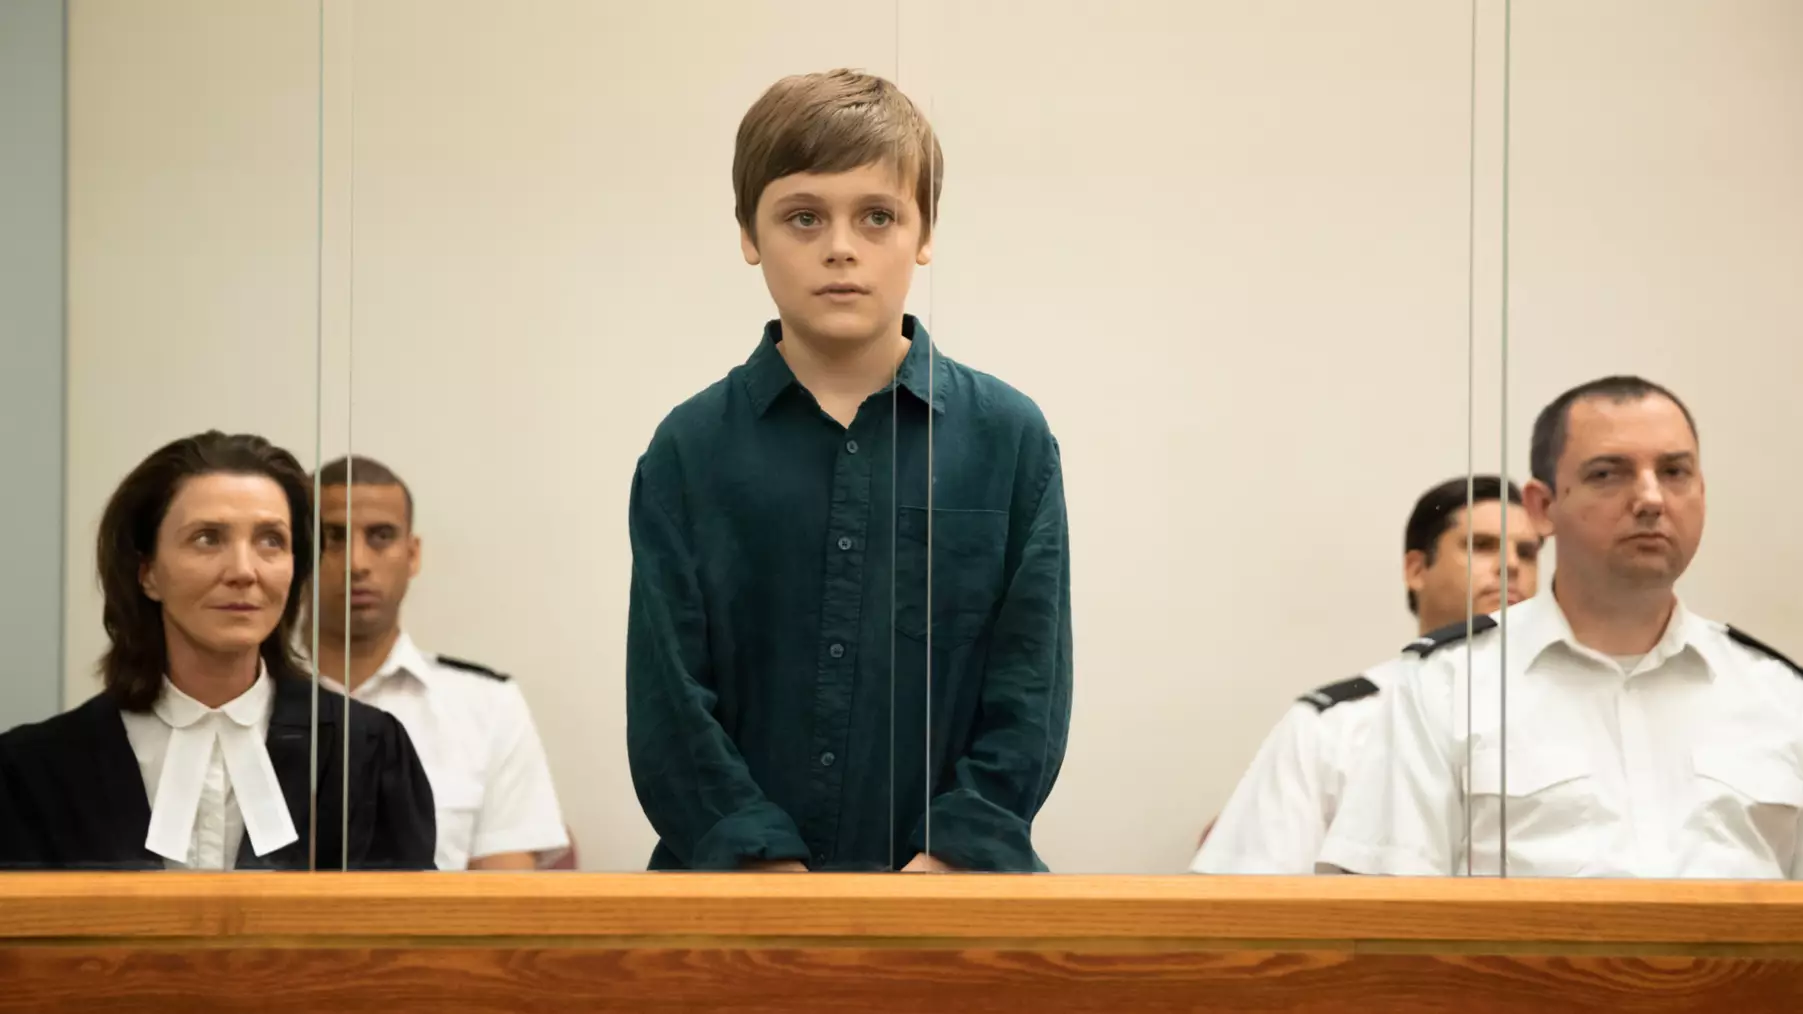 The Chilling True Story Behind New BBC Drama 'Responsible Child'